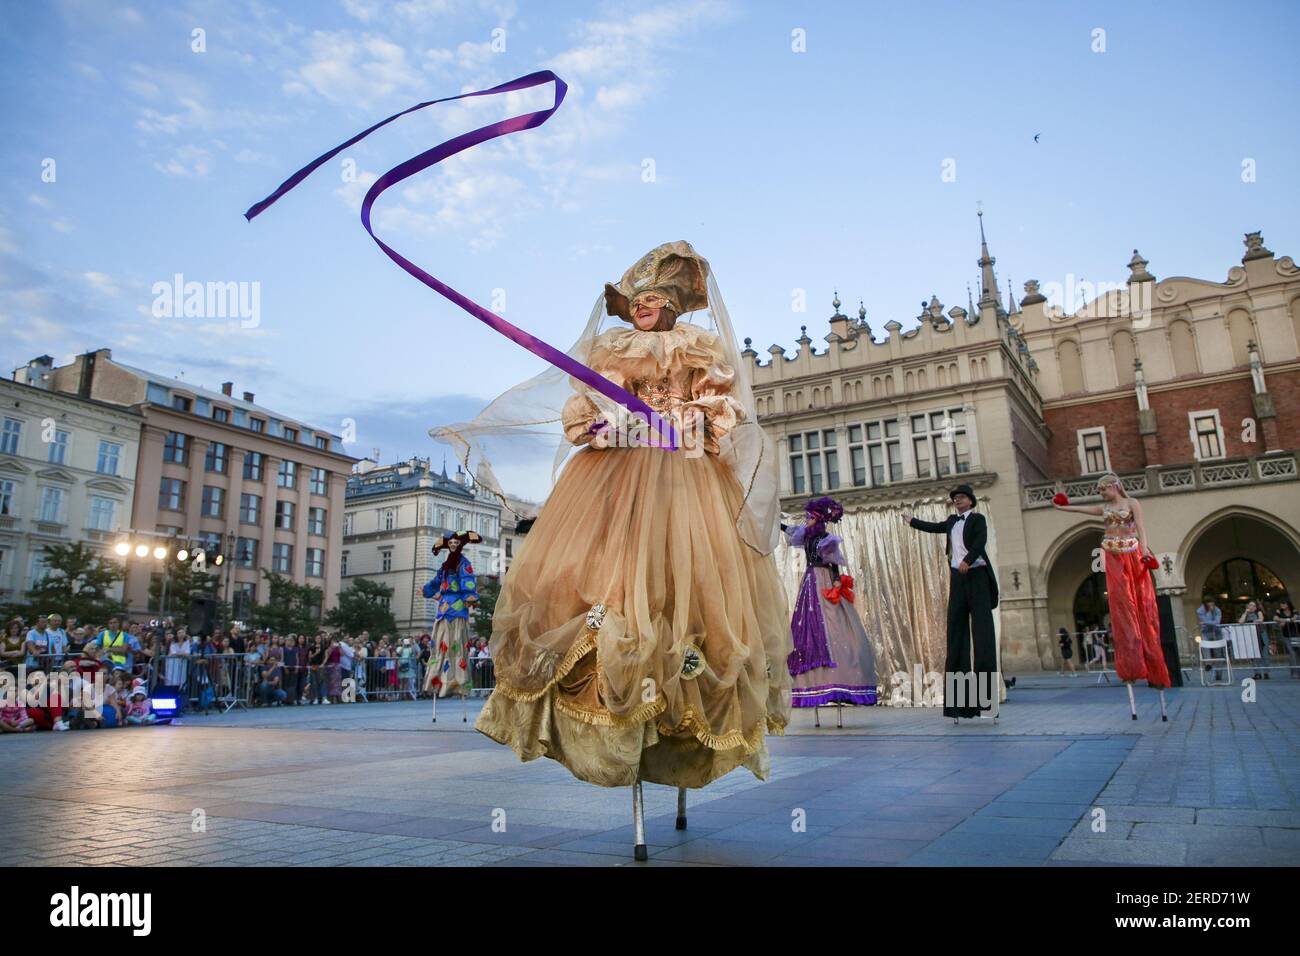 overskud binding paraply The Kiev Street Theatre 'Highlights' from Ukraine performances 'Dance  Pageant' during the 31 ULICA International Street Theatre Festival at the  Main Square in Krakow, Poland on July 8, 2018. The annual festival